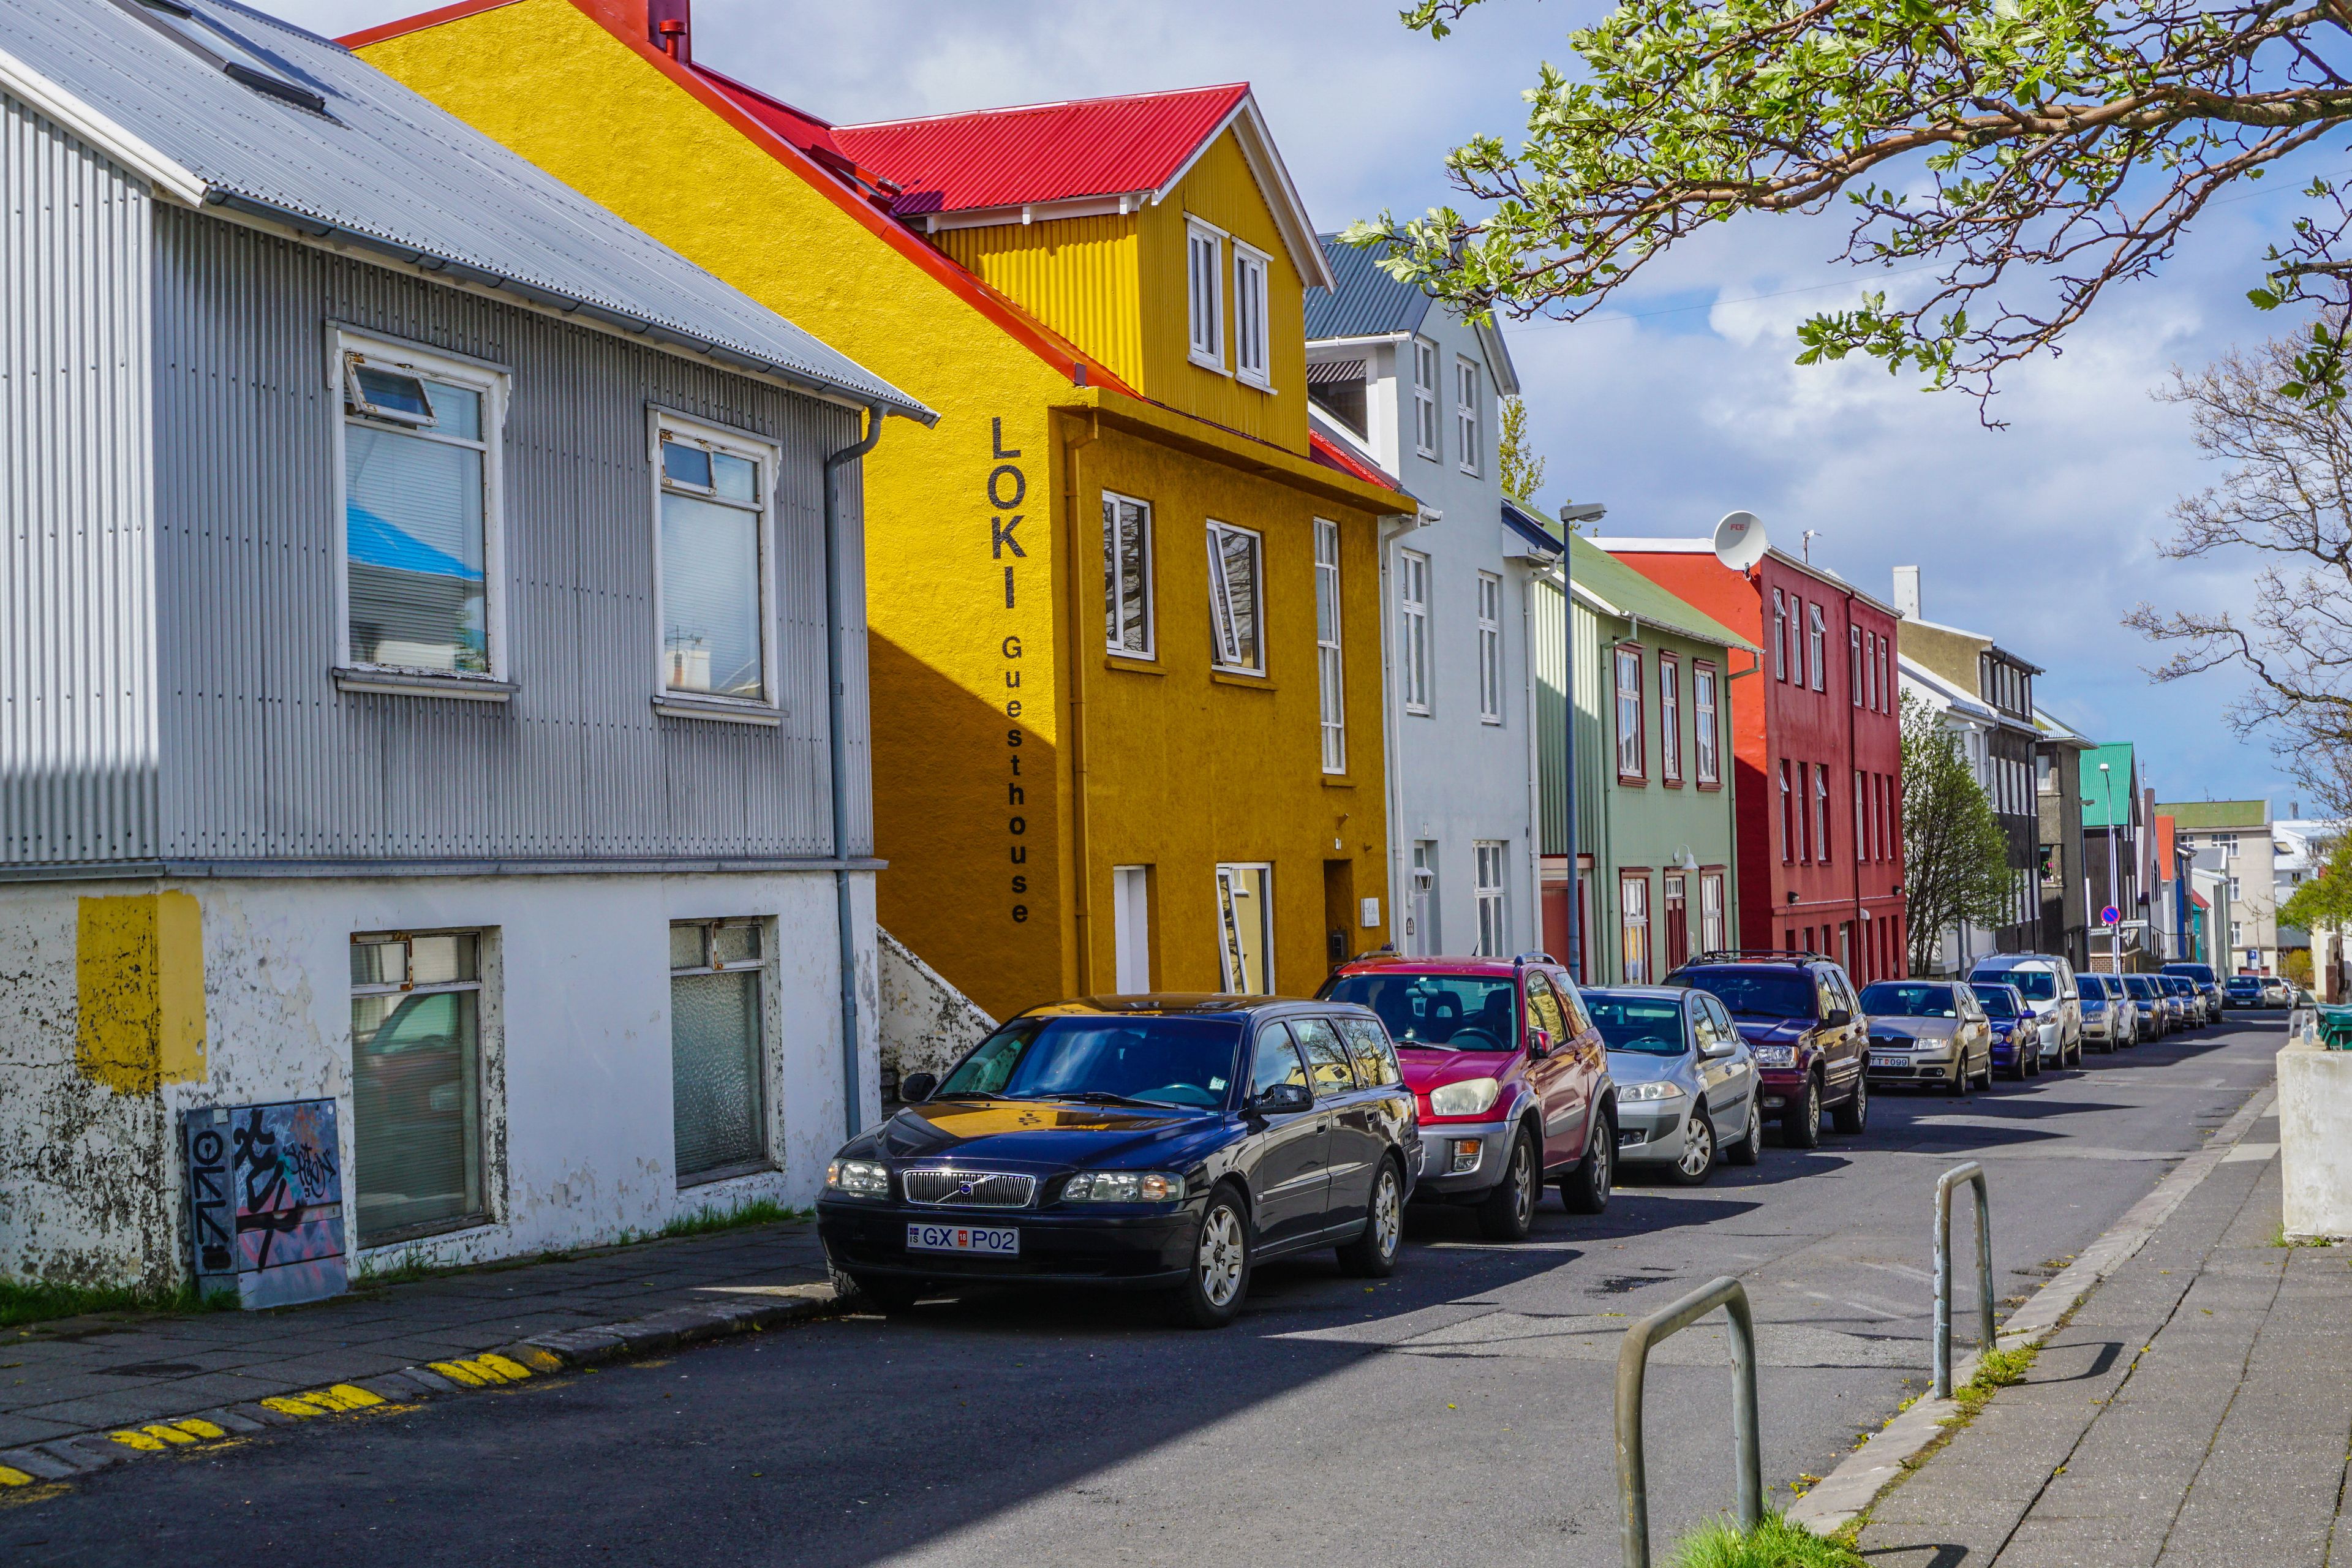 Colorful traditional houses lining the streets of Reykjavik, Iceland